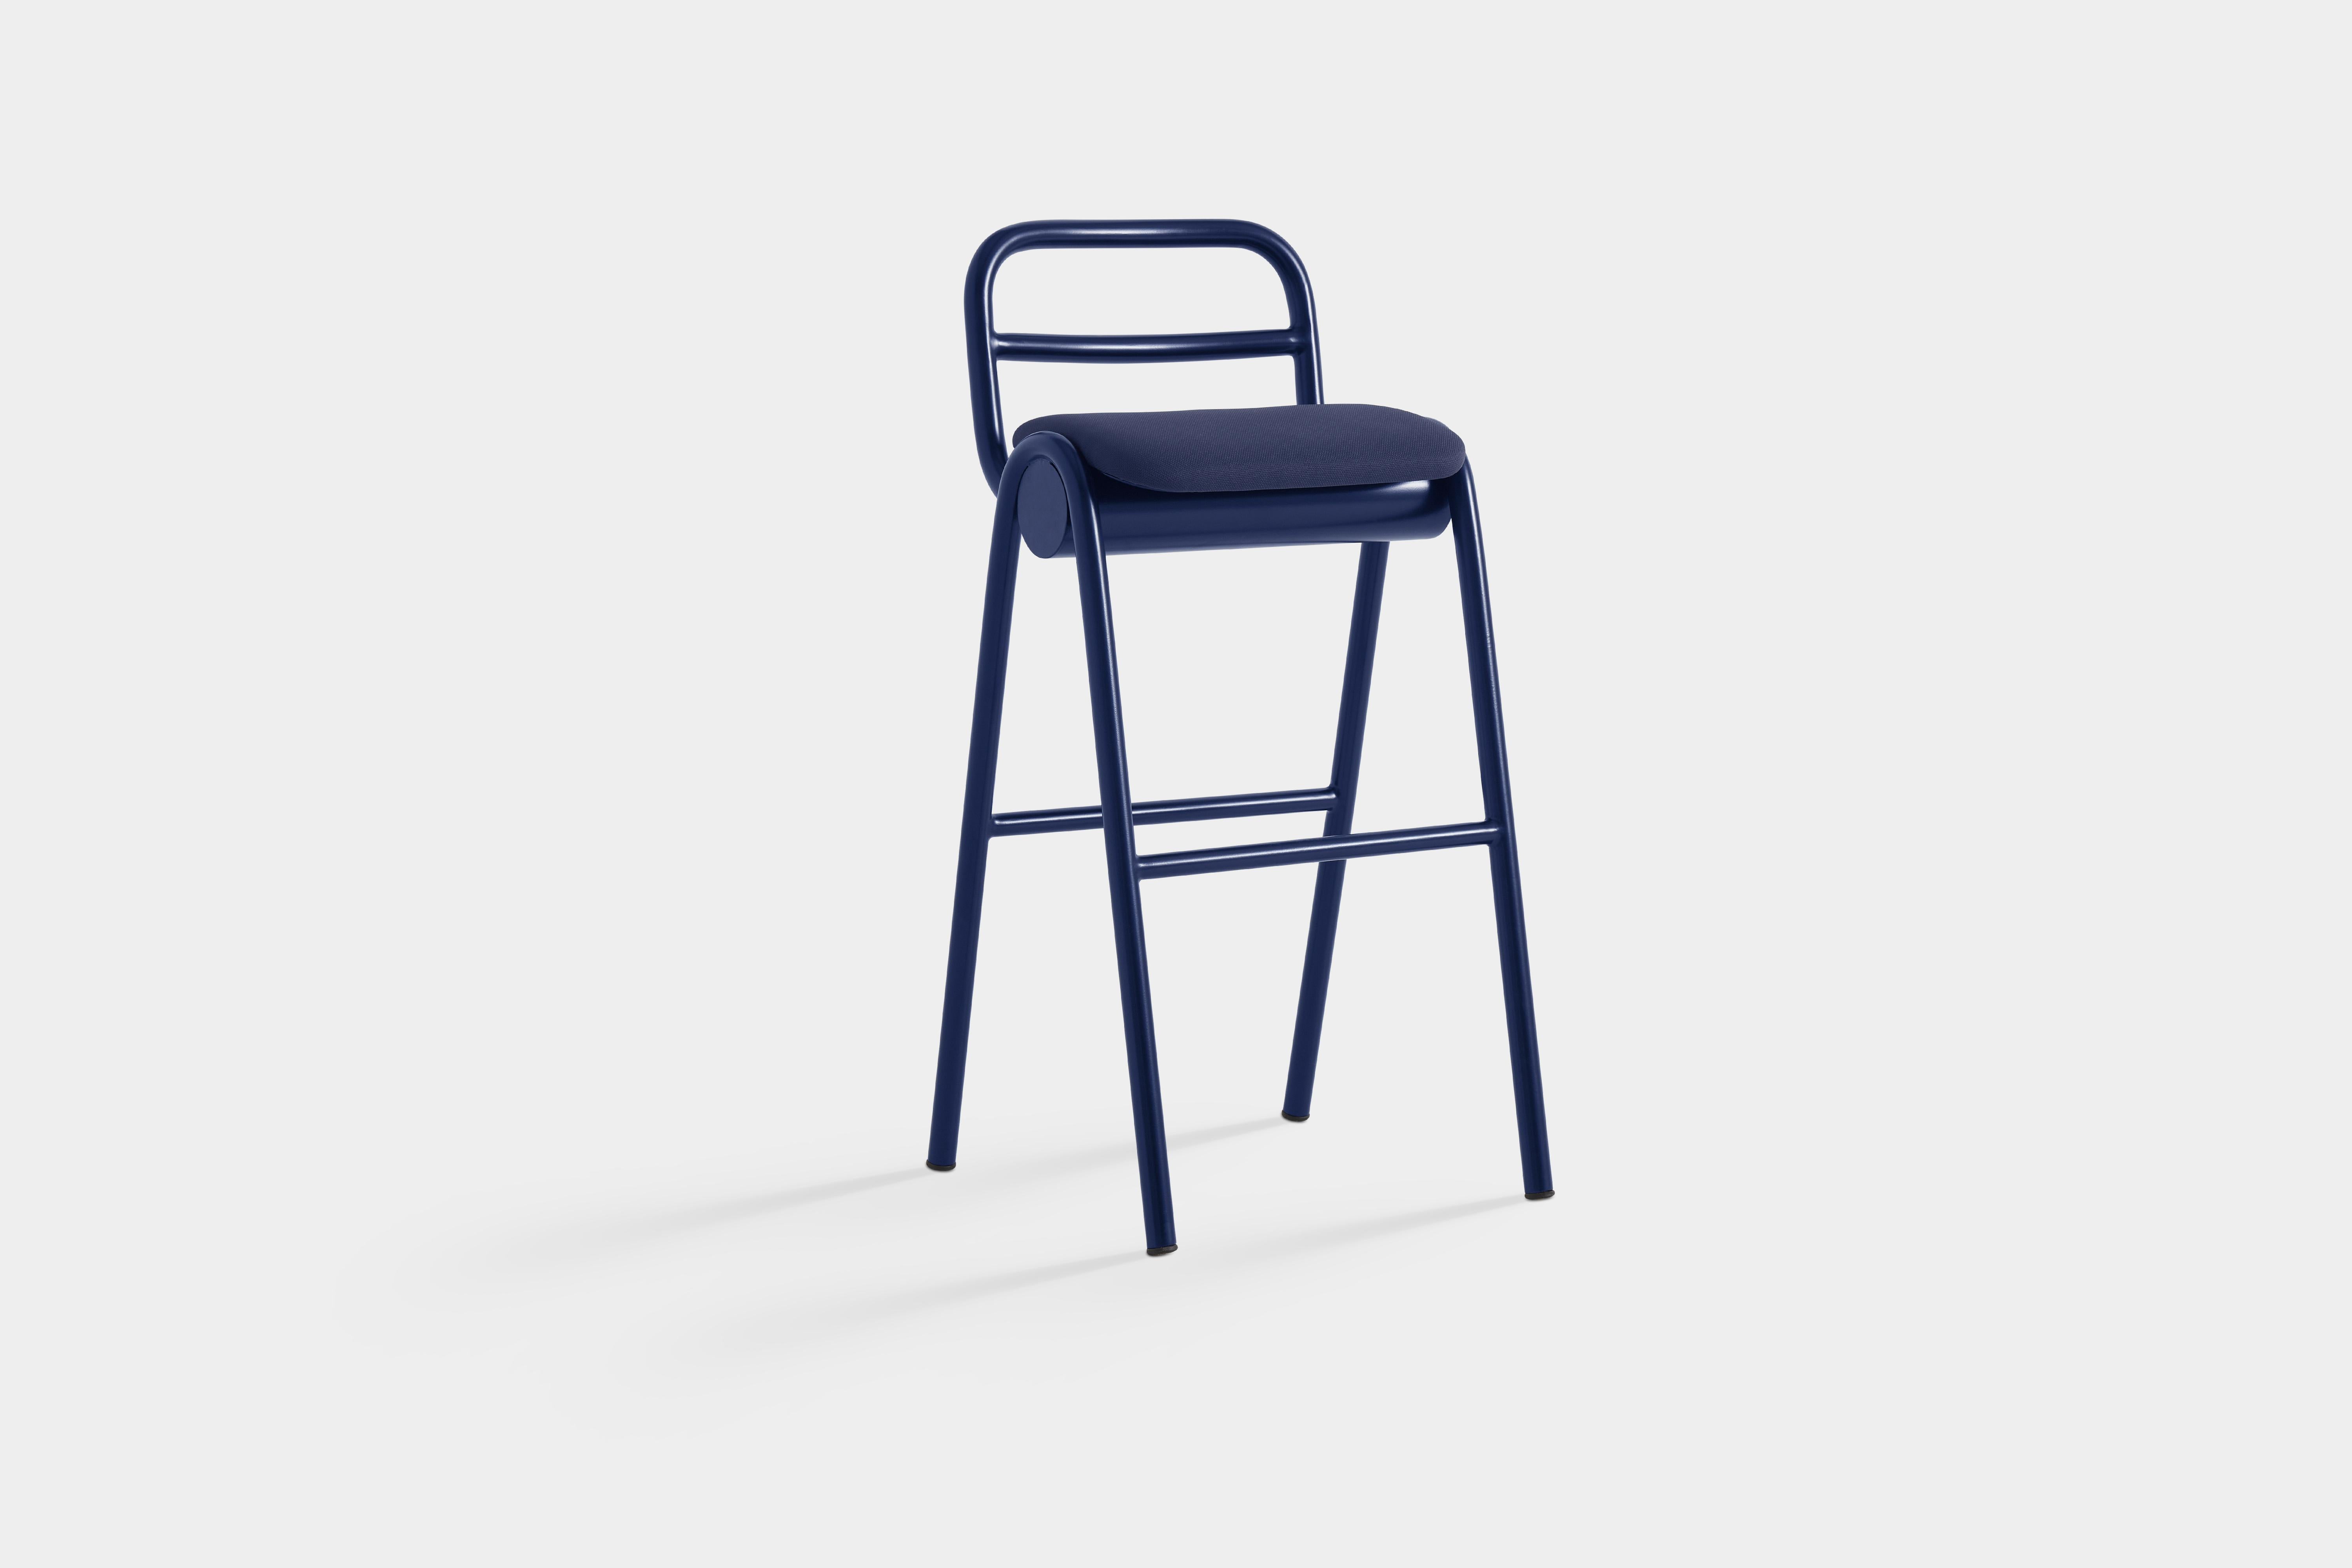 ZUM High Bar Stool With Backrest by Pepe Albargues
Designed By Carlos Jiménez. 
Dimensions: D 50 x W 49 x D 100 cm.
Materials: Aluminum, foam, plywood and upholstery.

Curved plywood seat. Aluminum structure lacquered any RAL color. Foam CMHR (high